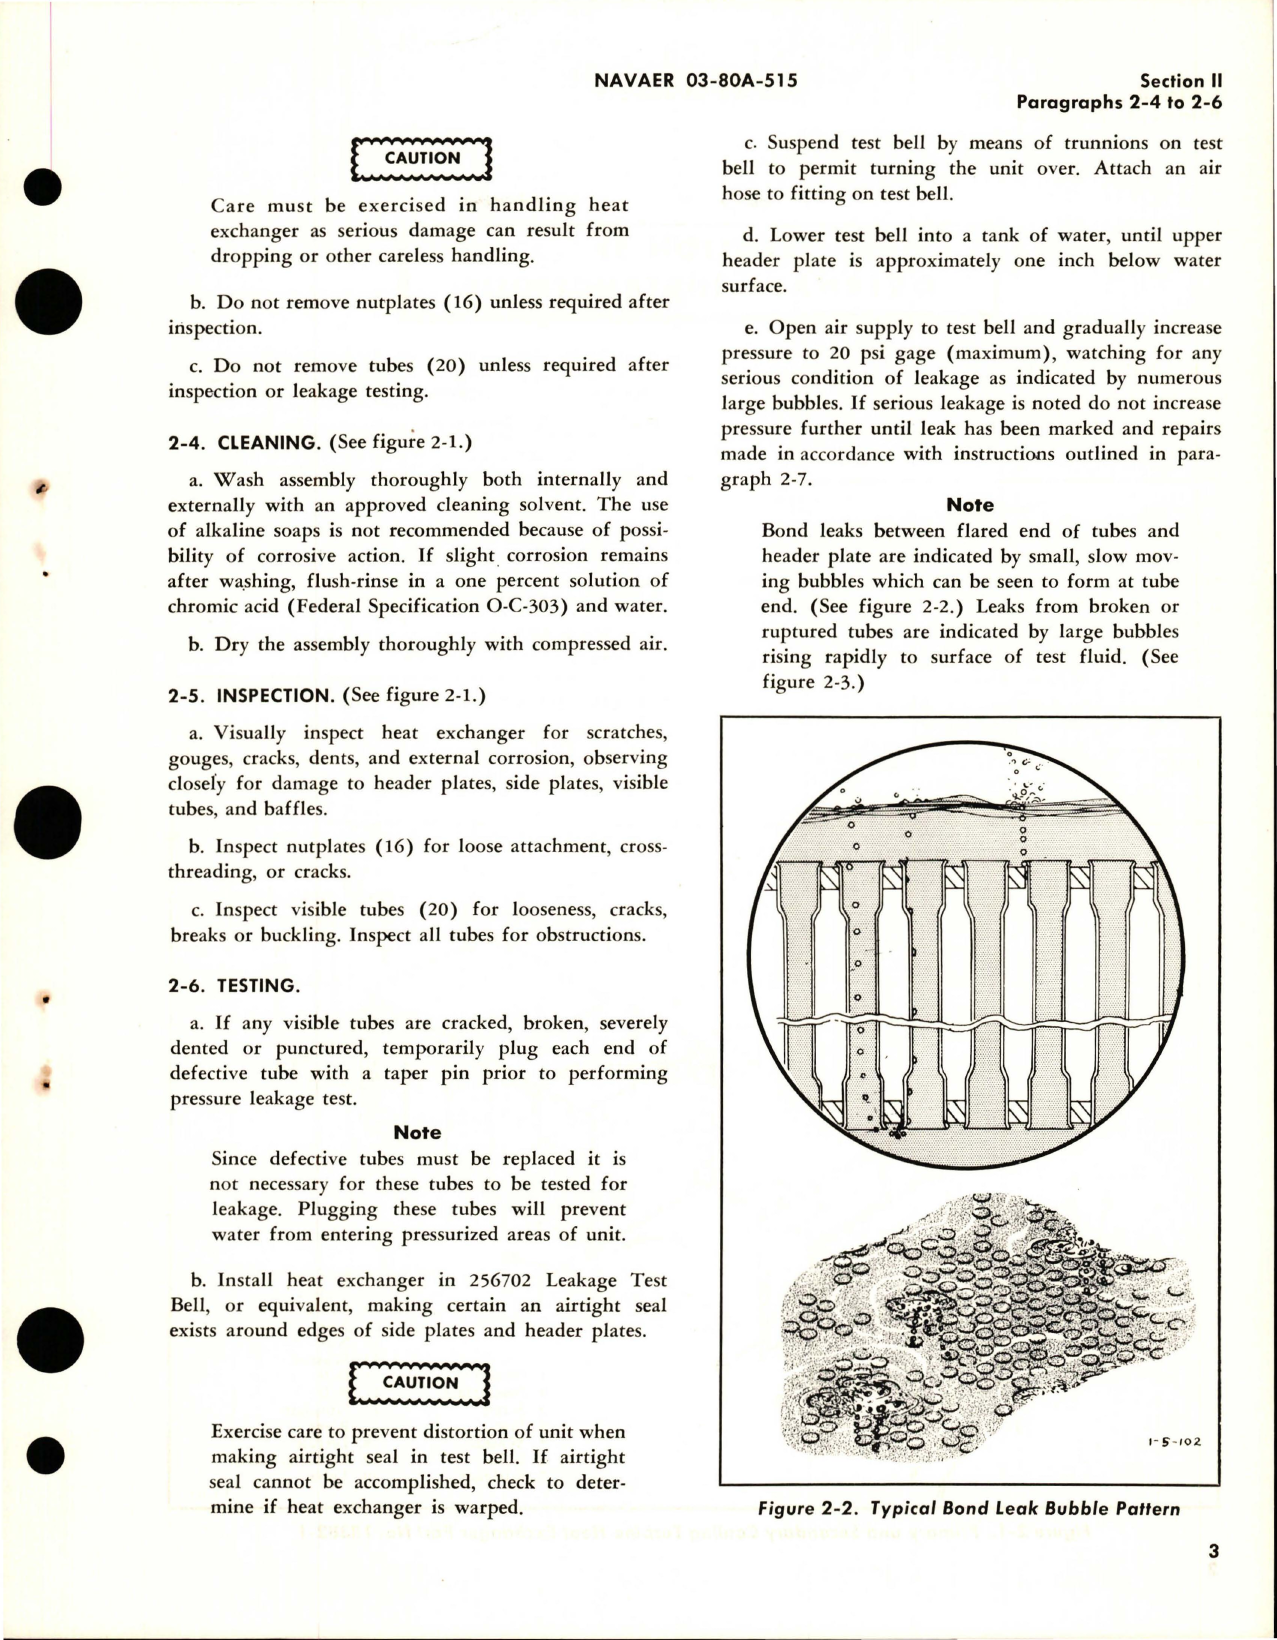 Sample page 7 from AirCorps Library document: Overhaul Instructions for Heat Exchangers 